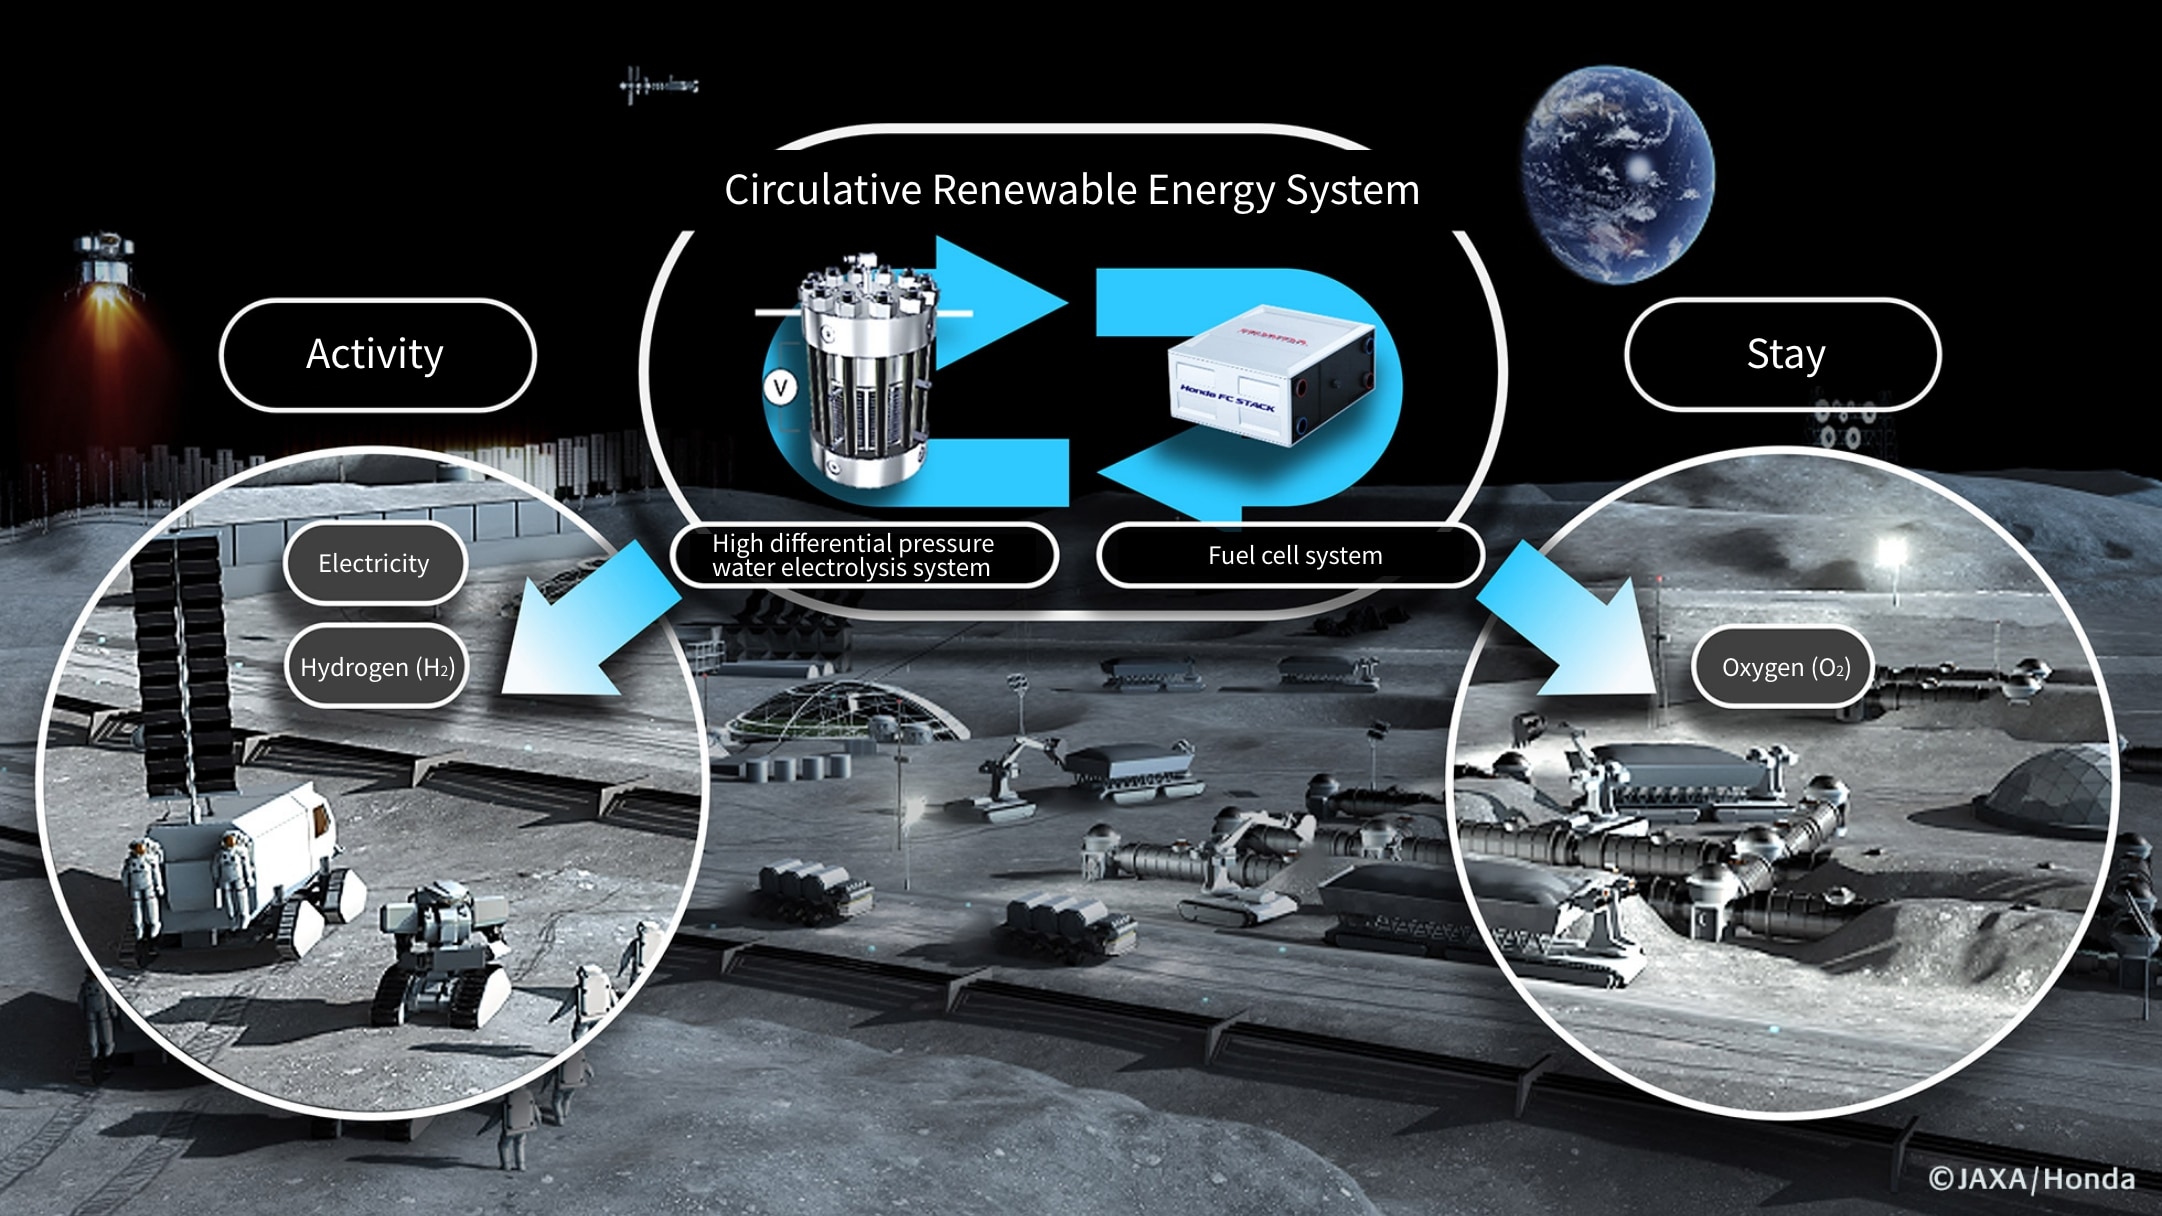 Circulative renewable energy system Honda is working to develop as part of the infrastructure for humanity's sustained habitation on the Moon where resources other than sunlight and water are not available.